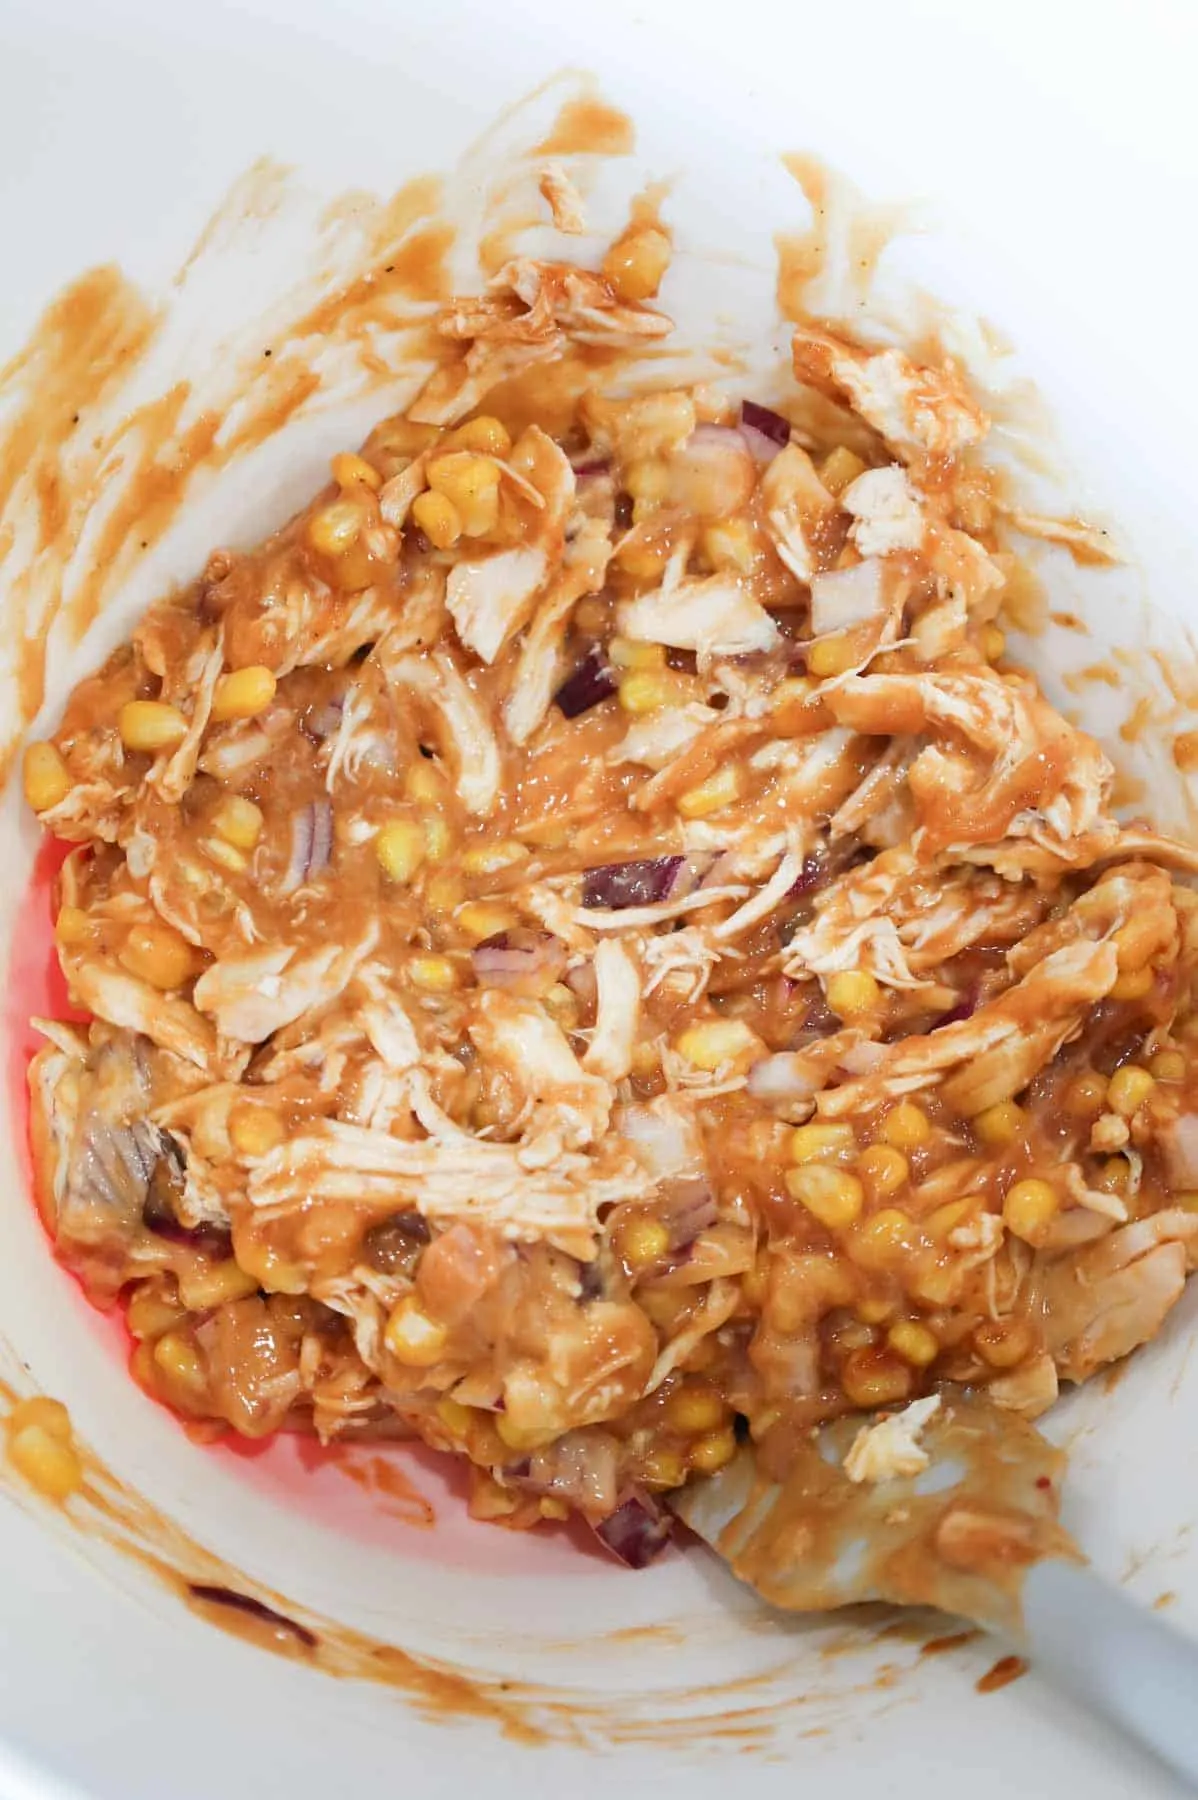 shredded chicken, cream of chicken and bbq sauce mixture in a bowl